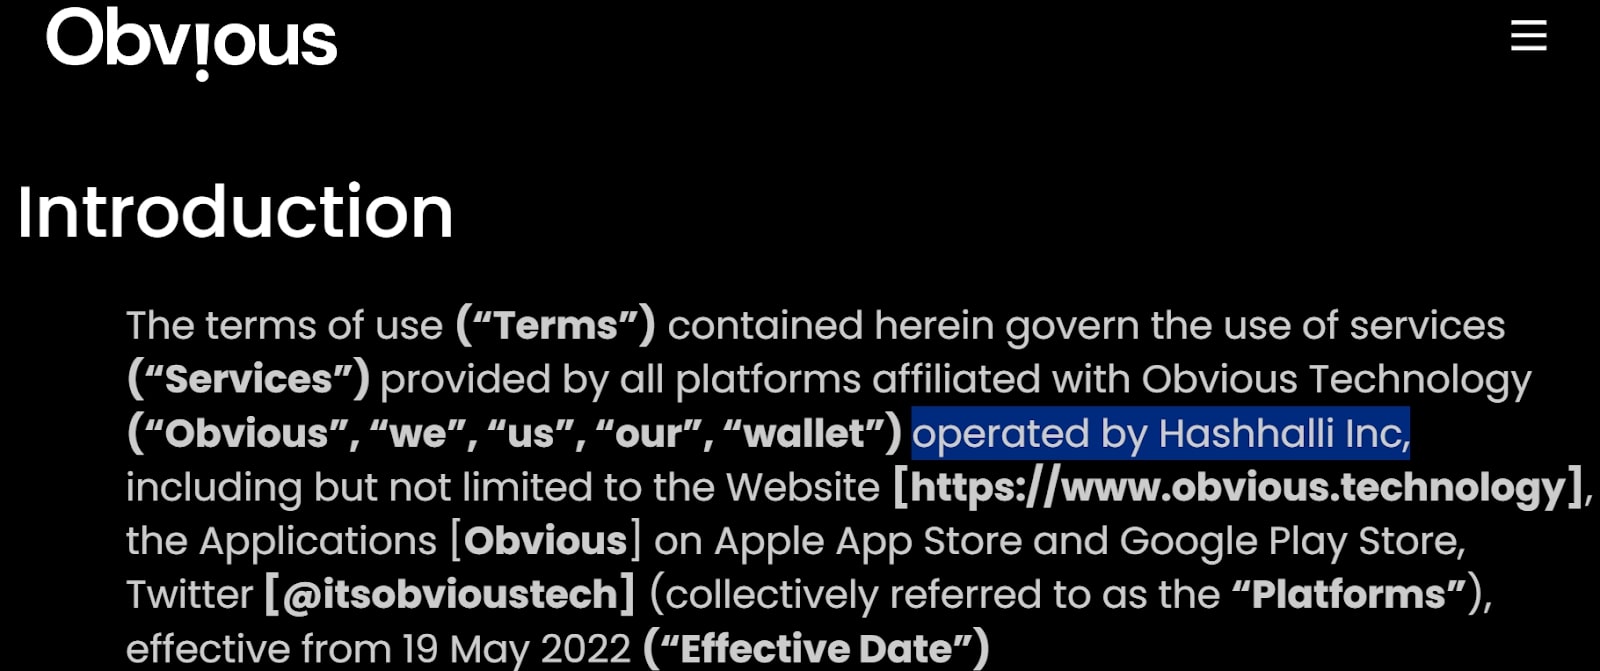 Related Entity of the Obvious Wallet